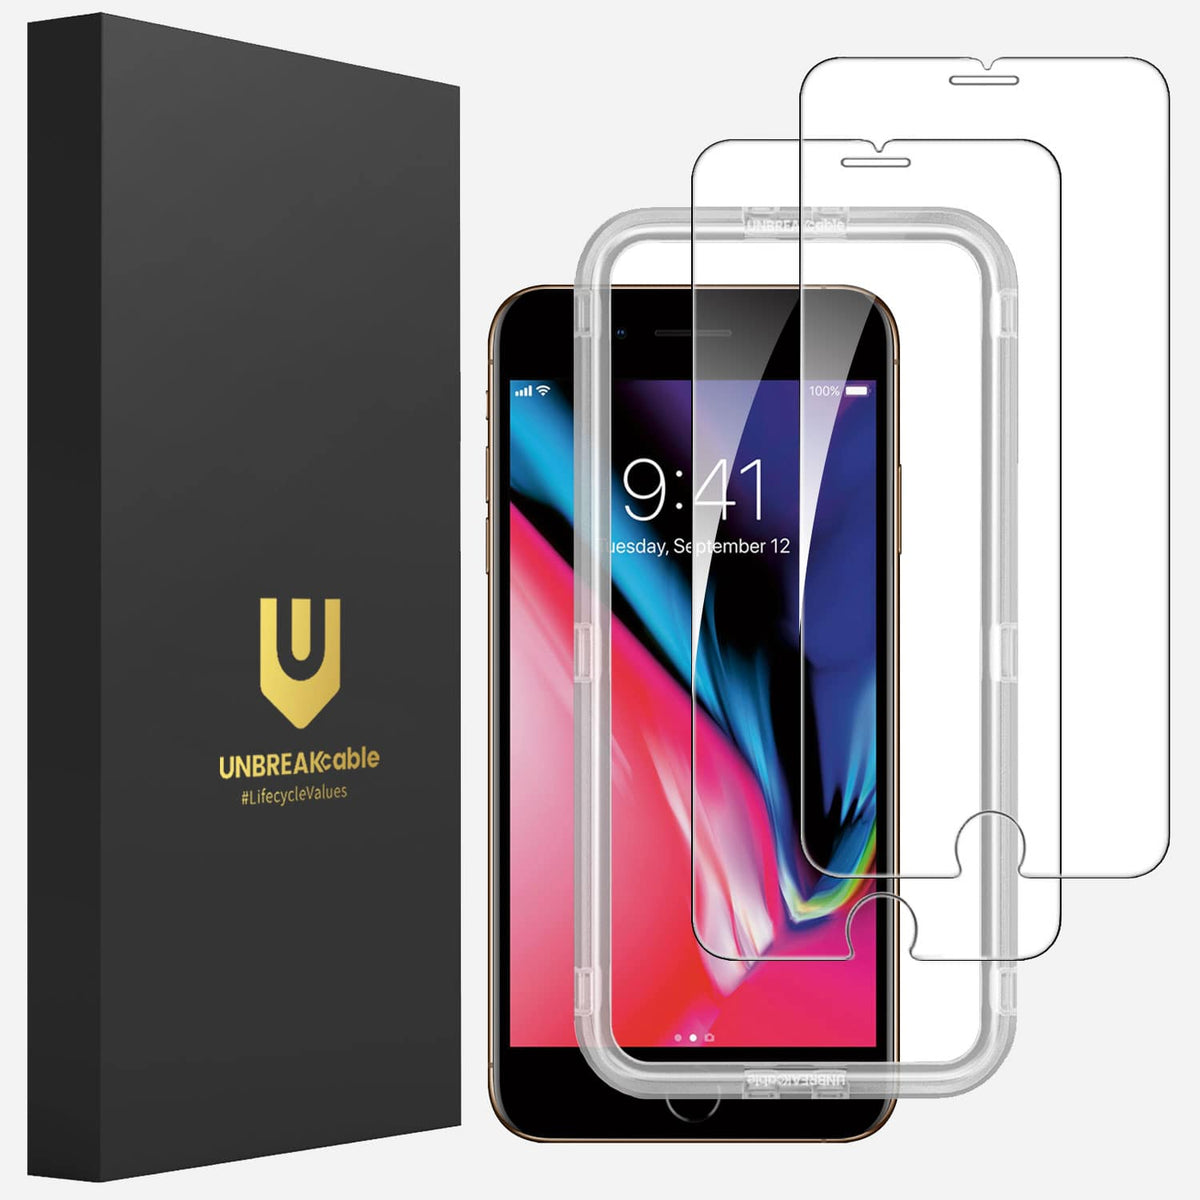 unbreakcable screen protectors with iphone 8